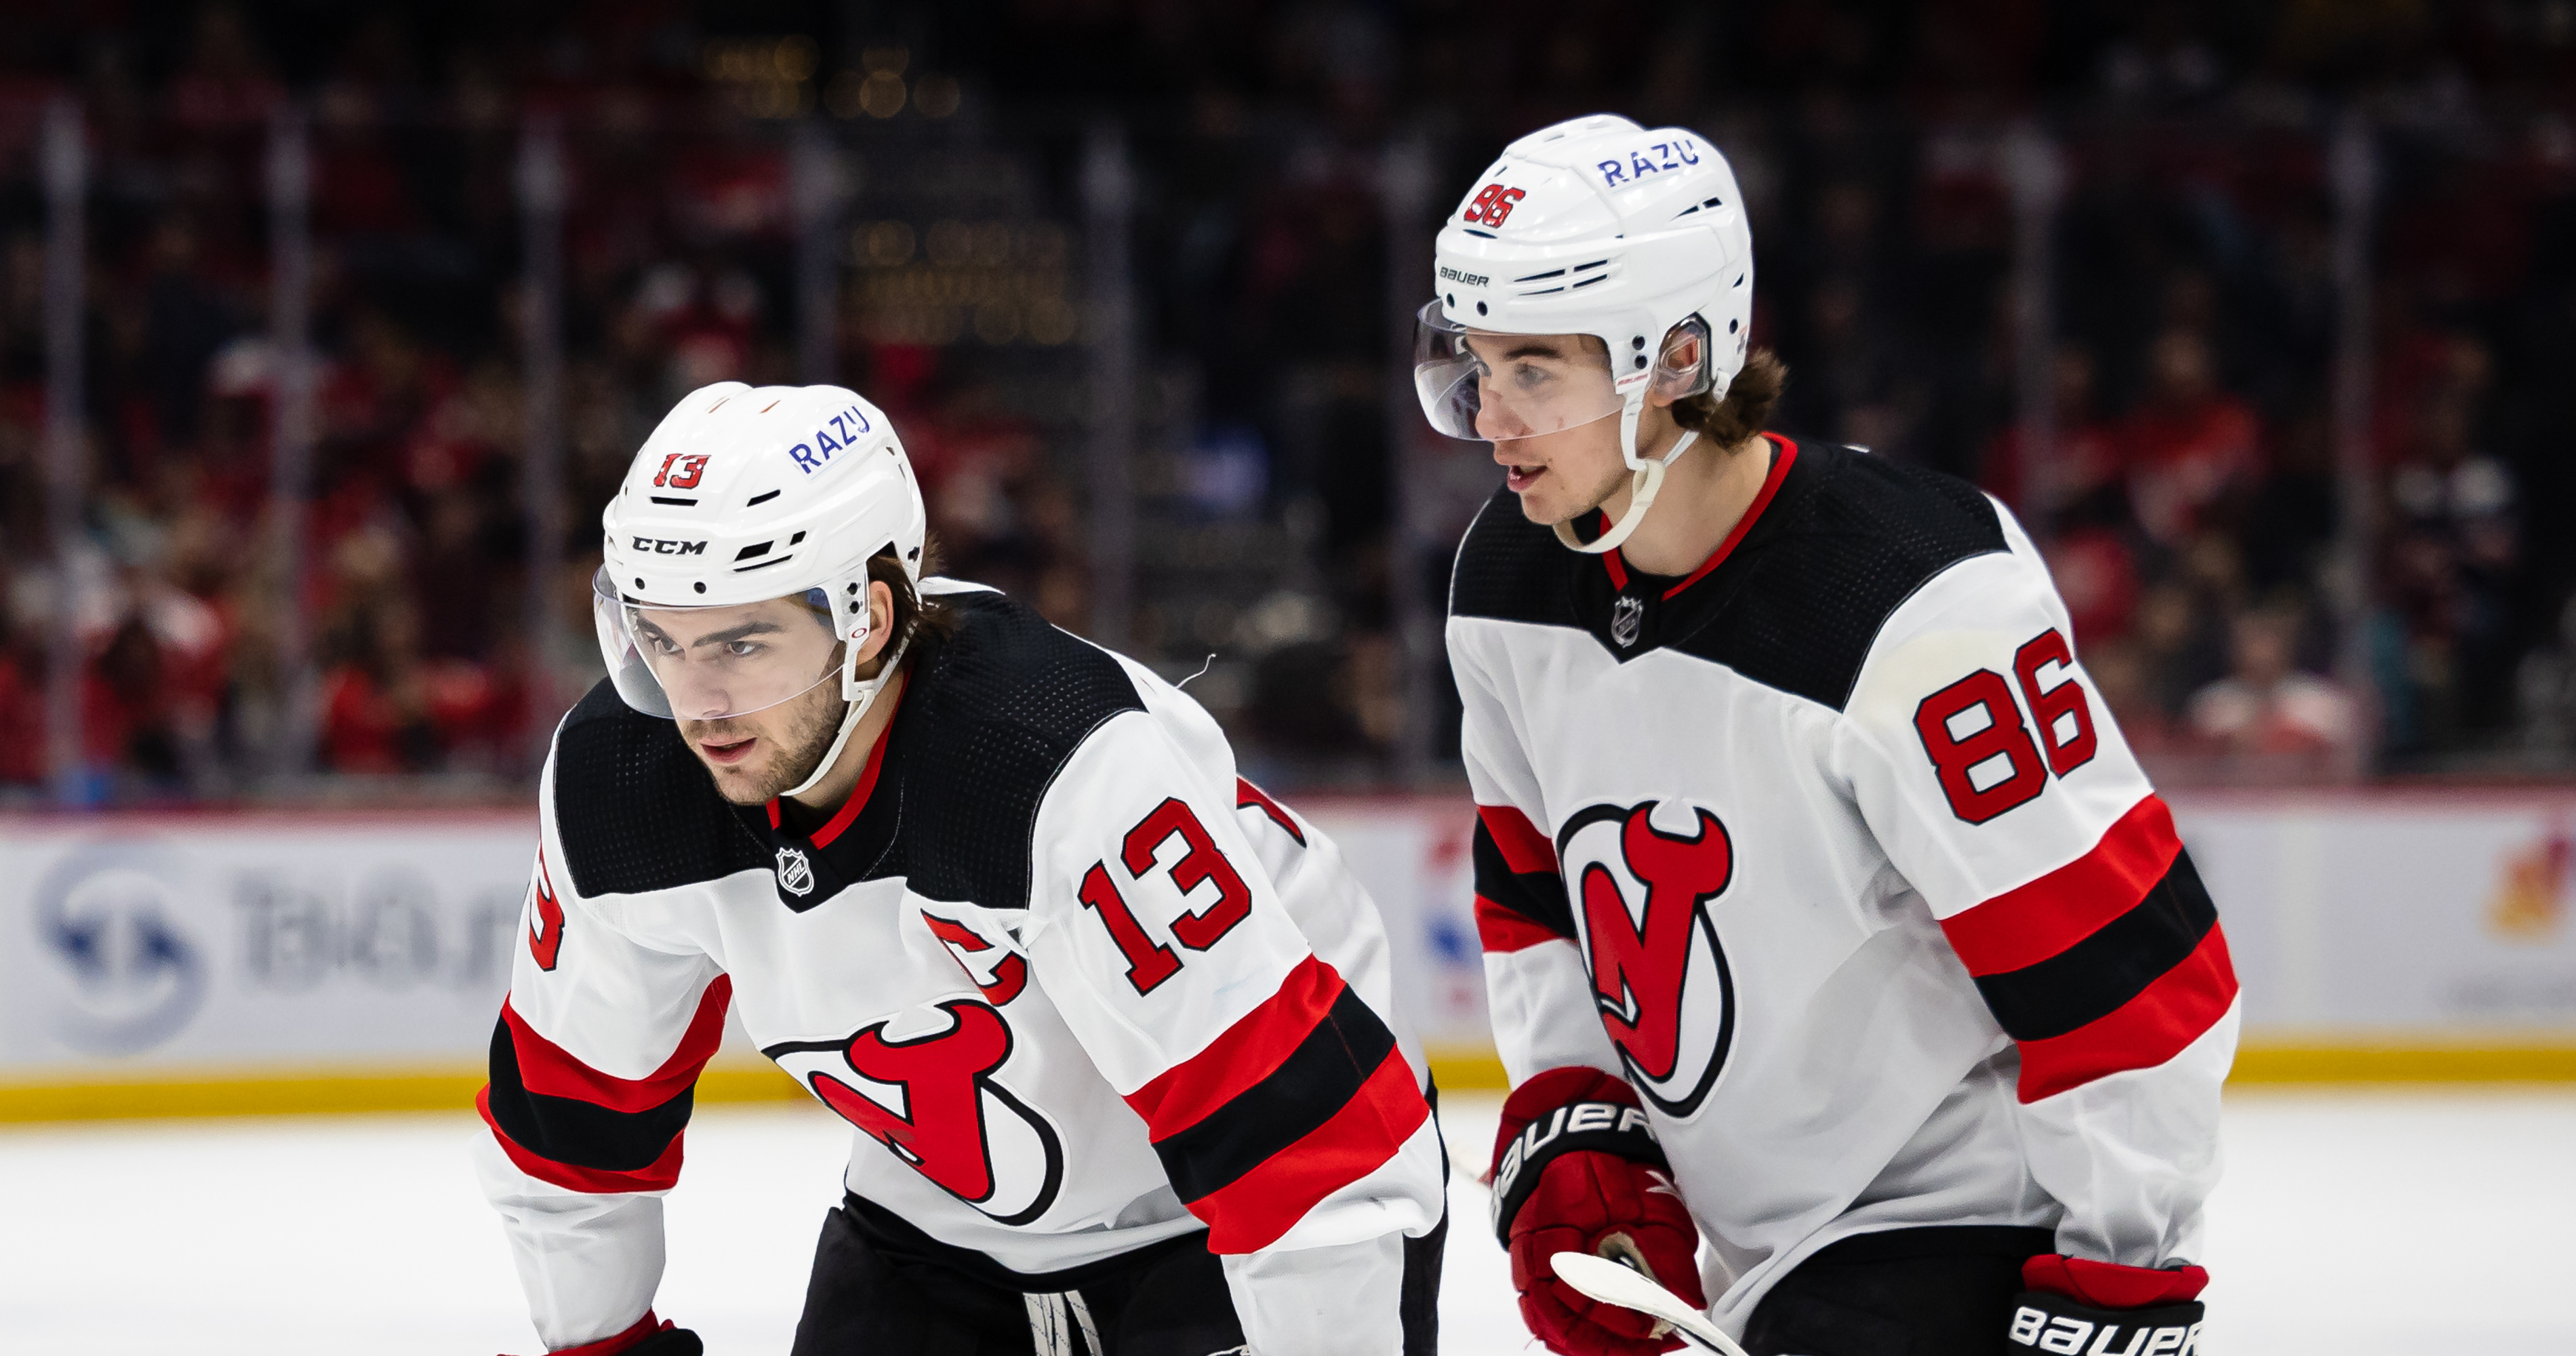 New Jersey Devils In the Market For a Top-Six Winger - The Hockey News